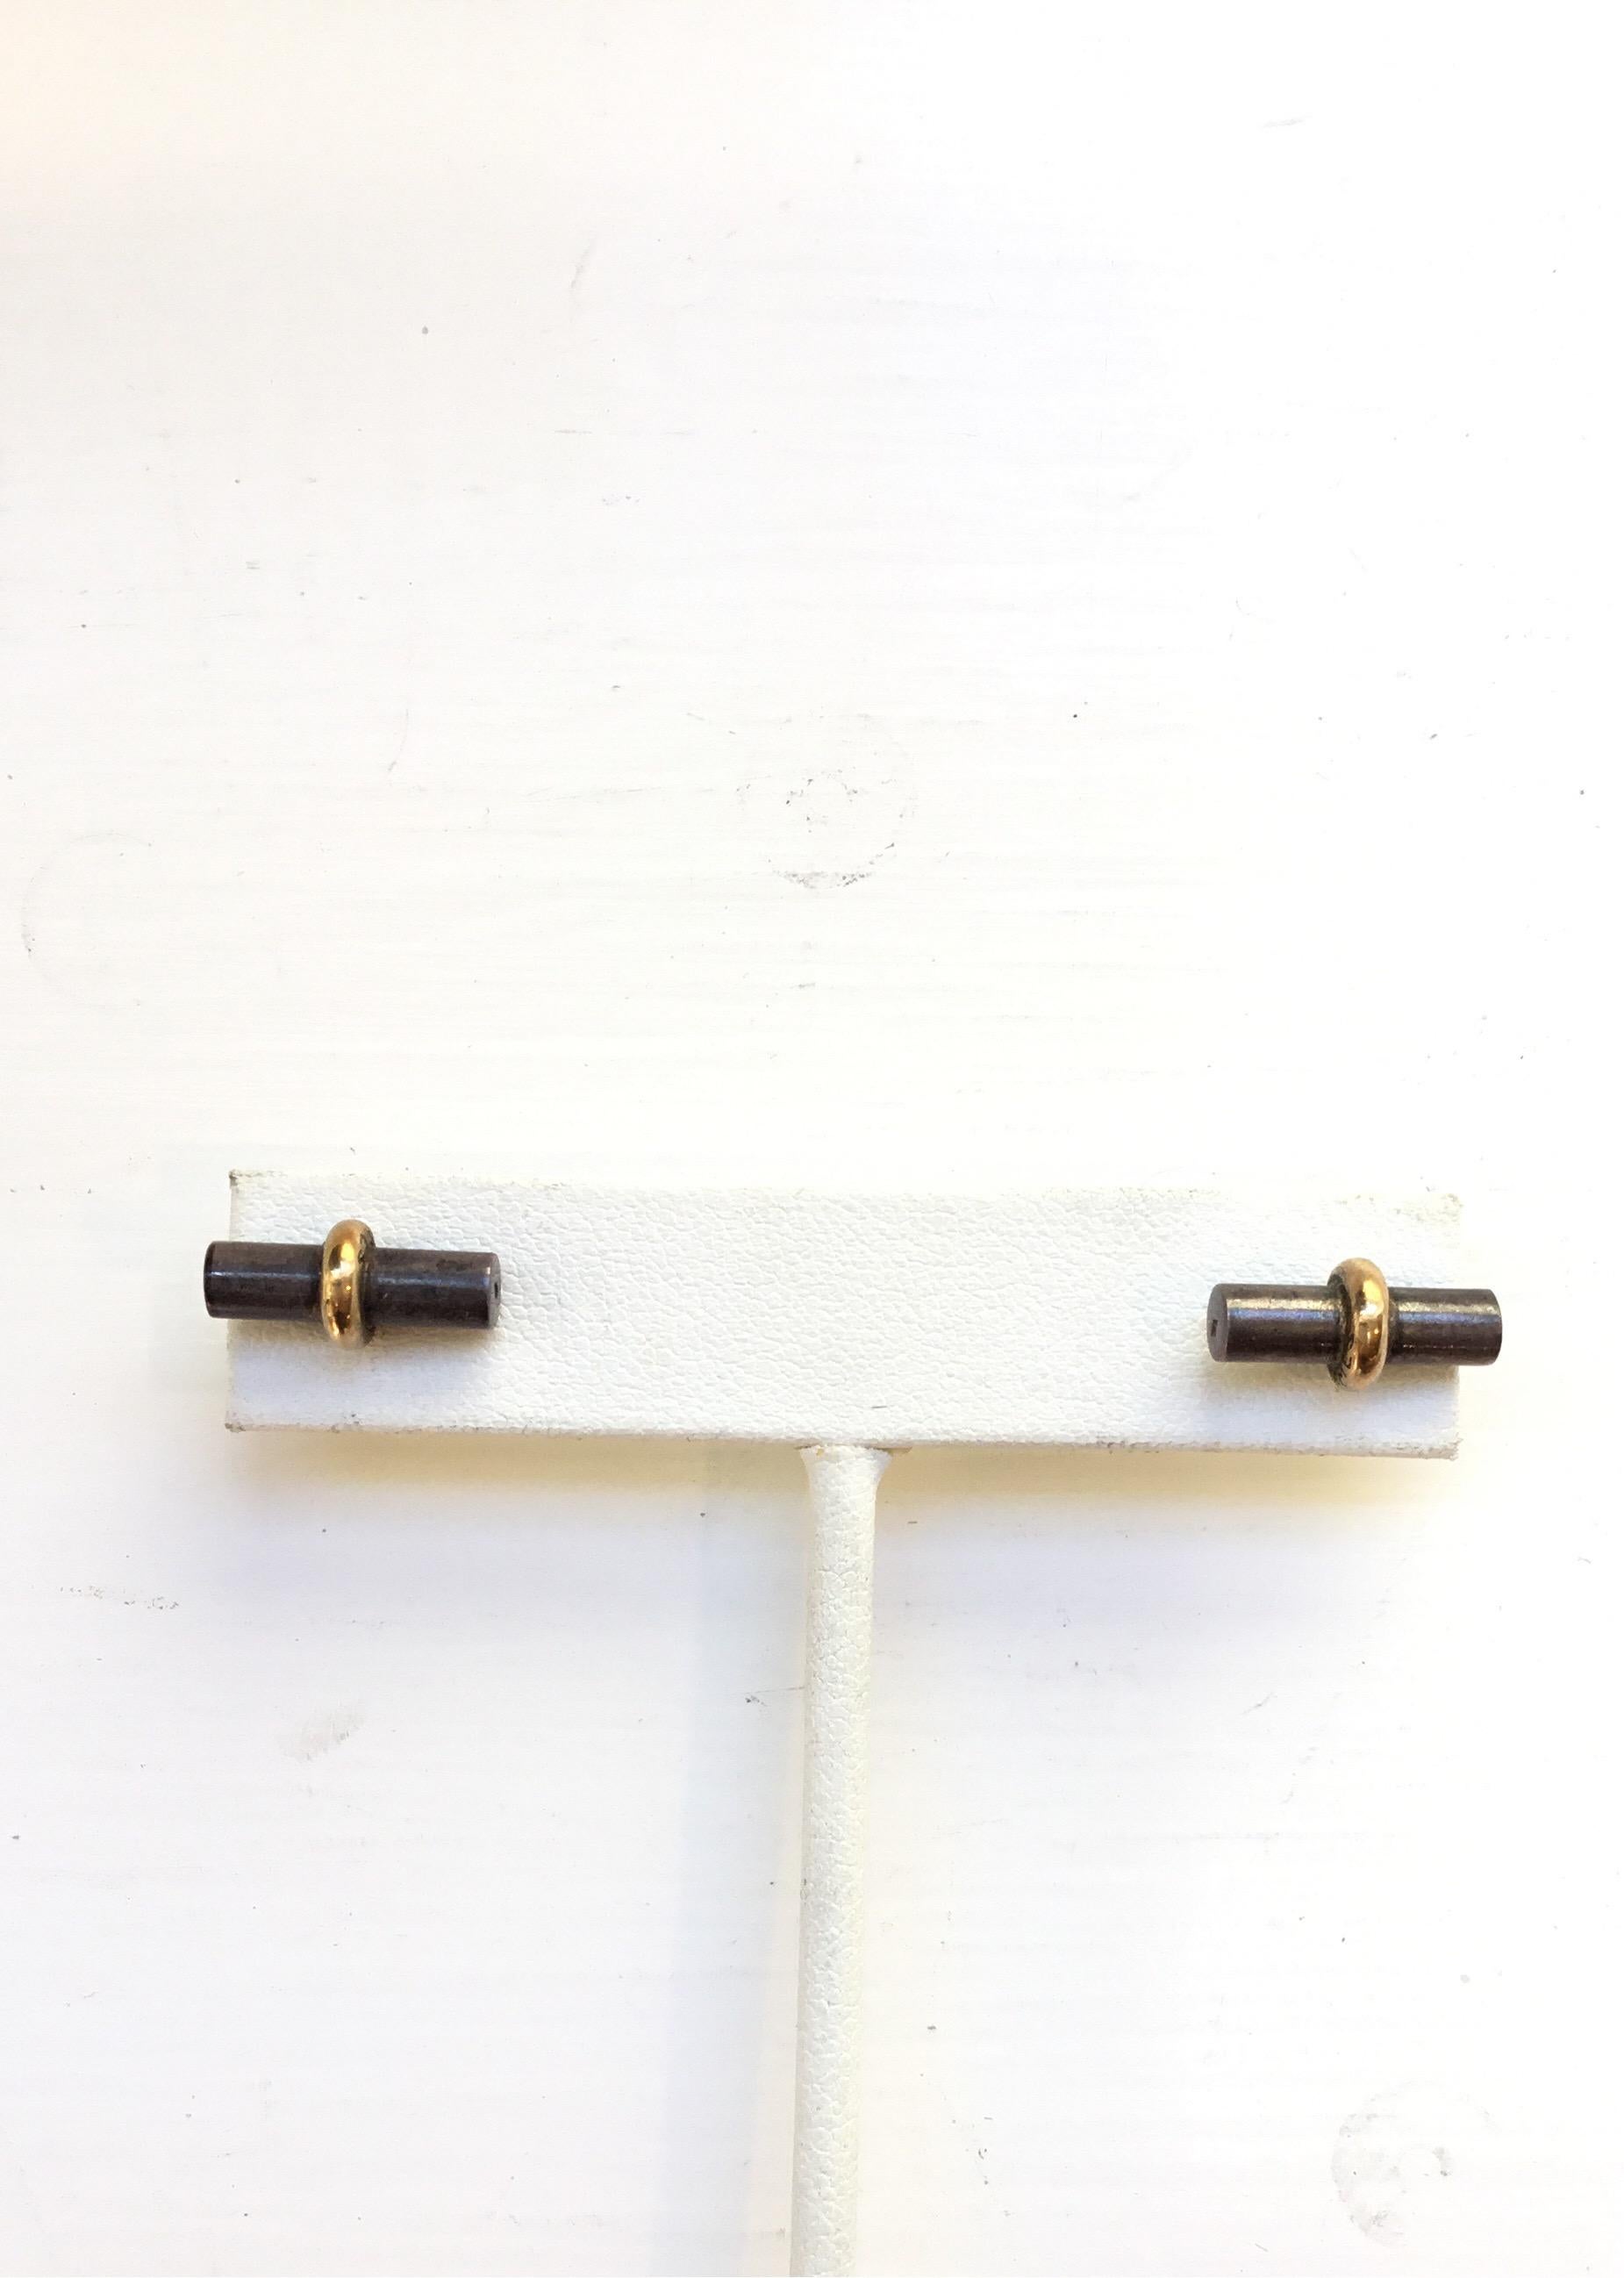 Hermes bar stud pierced earrings with squeeze-insert backs. Earrings are composed of 18k gold and sterling silver. 